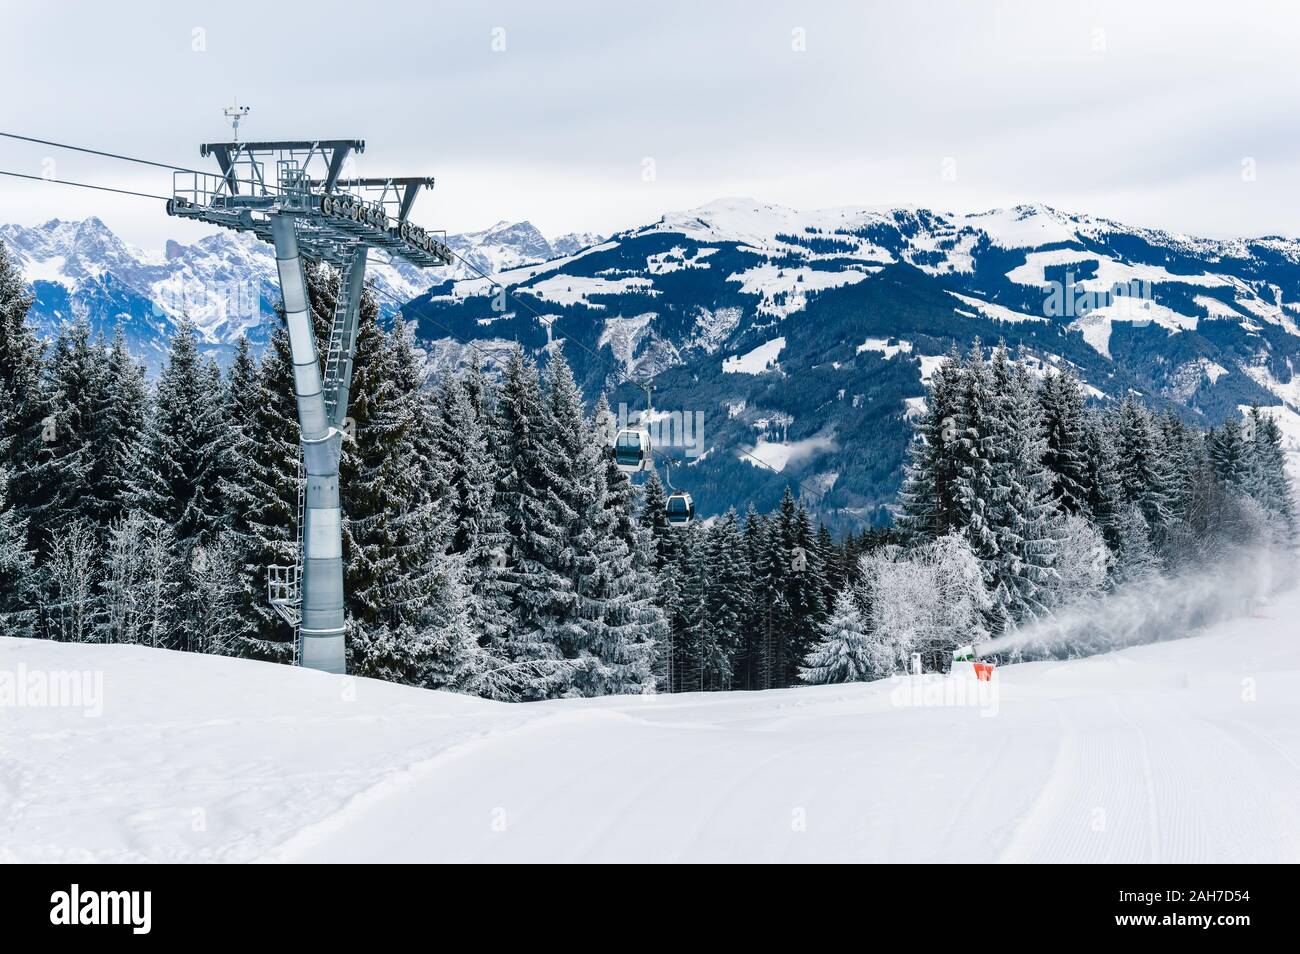 Mountains ski resort Zell am See Kaprun, Austria. Beautiful white winter landscape with snow, cable car over fir tree forest and snow cannon in snow-c Stock Photo